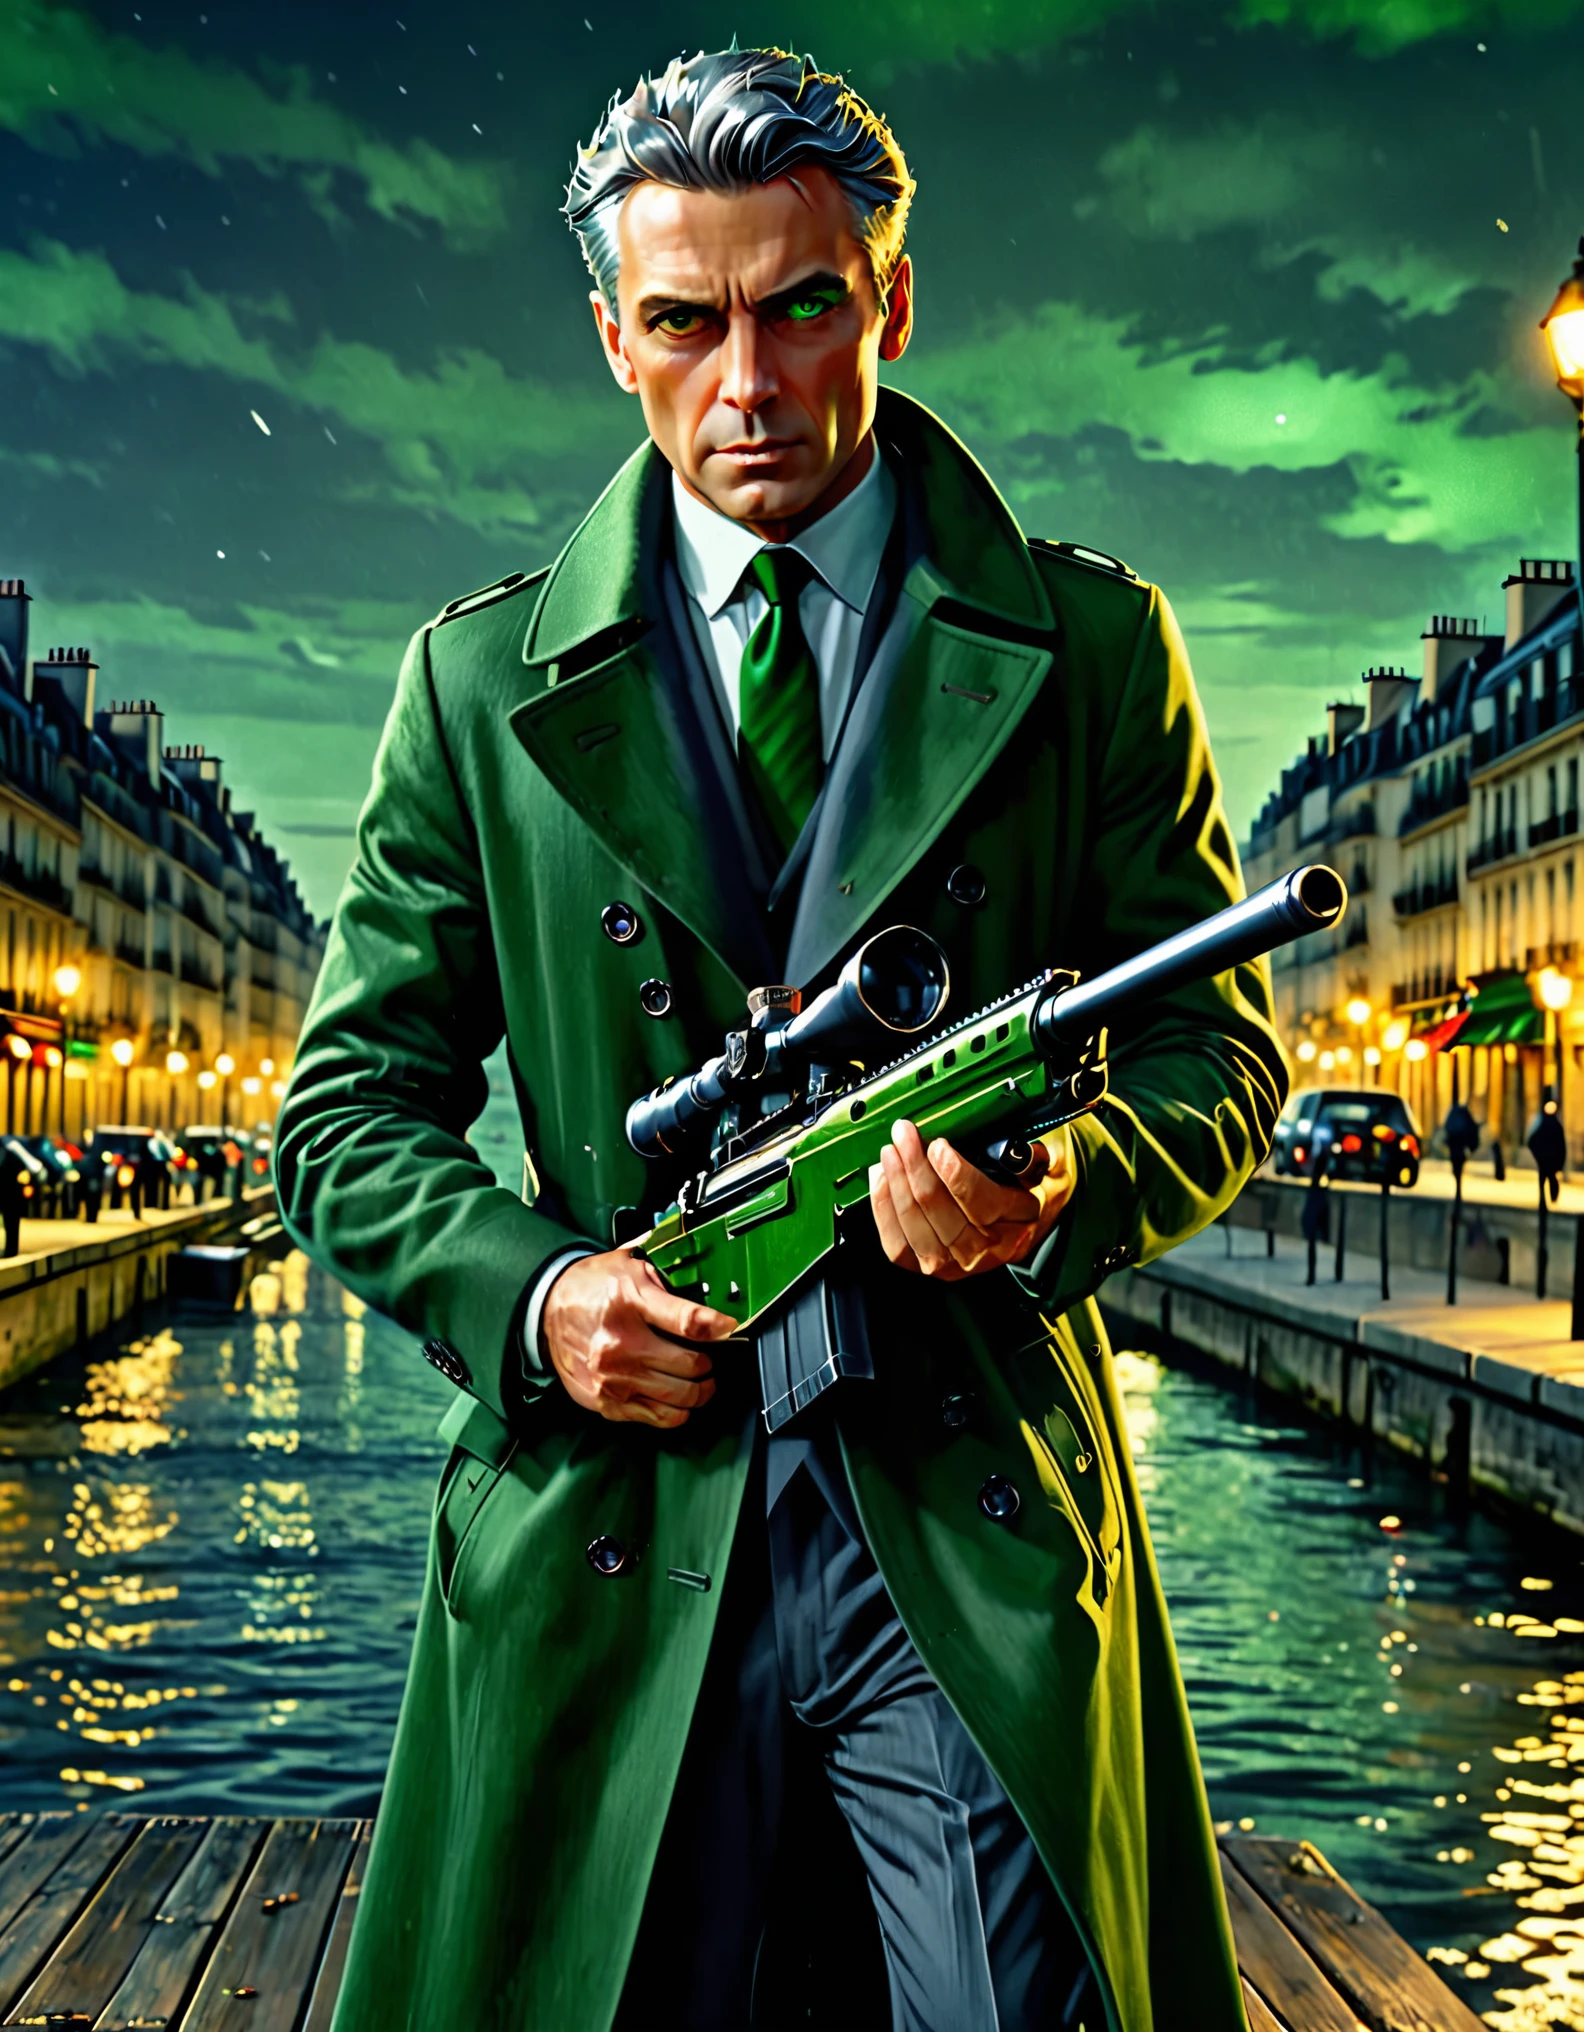 masterpiece, best quality, hyper detailed, ultra detailed, 1man, solo, solo focus, arafed french man in a coat, (using sniper rifle), tall body, middle-aged man, professional, relaxed but determined, serious but cool, he's a hitman in peacoat, he is wearing a green trenchcoat, dark green suit and tie, slacks, black dress shoes, full body and head shot, full body shoot, full-body-shot, fullbody shot, dock, paris, night backdrop, film noire atmosphere, reddish grey hair, green eyes, hair over one eye, secret agent, spy, midnight, noir lighting.